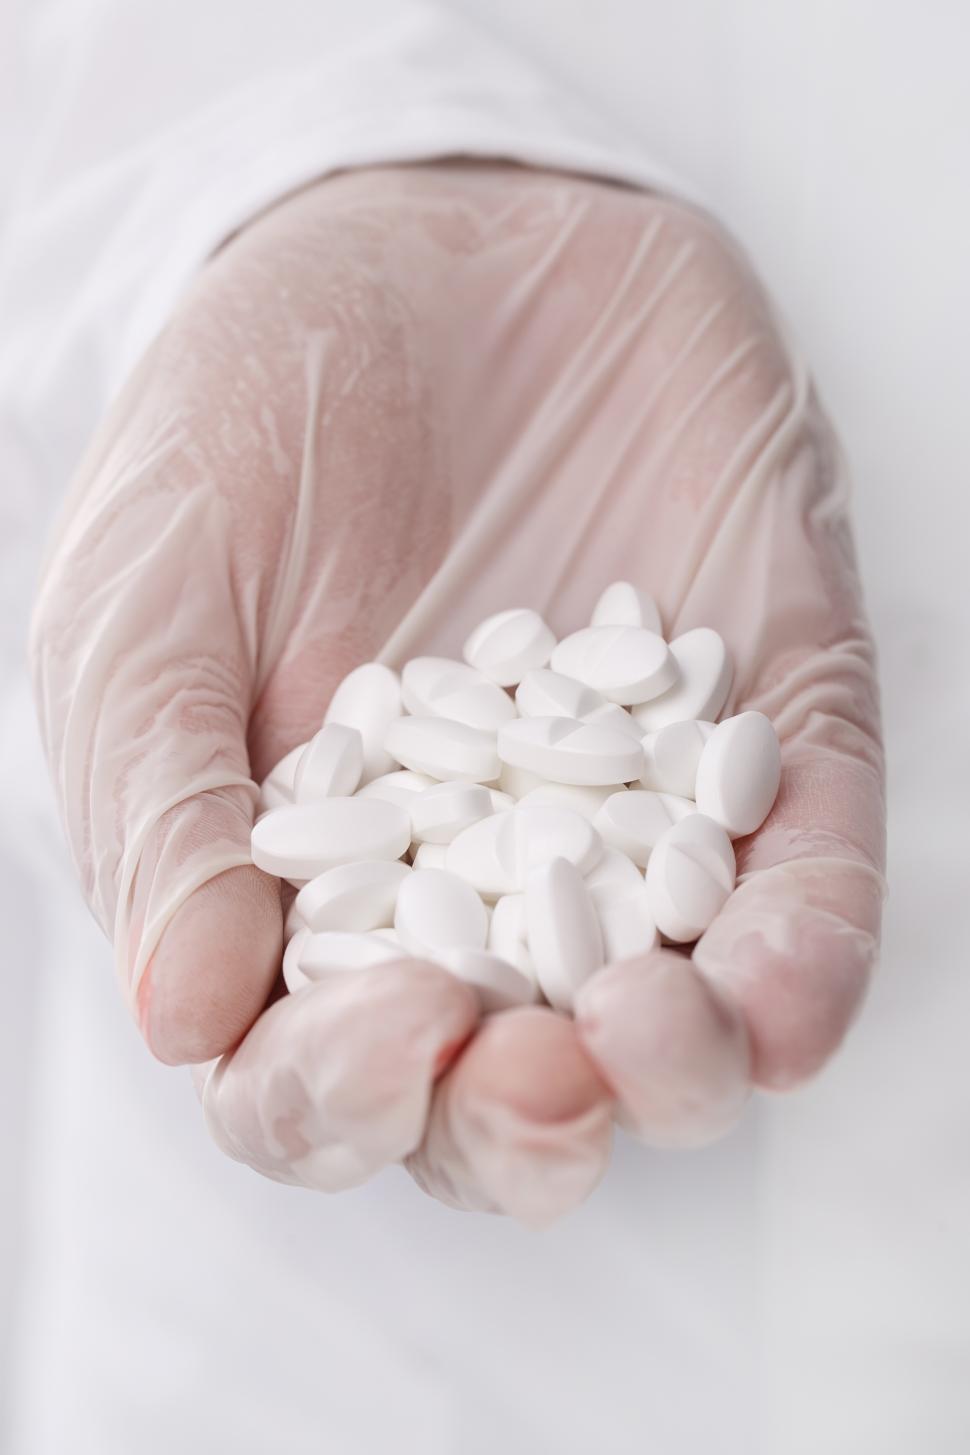 Free Image of Doctor holding heap of white pills 